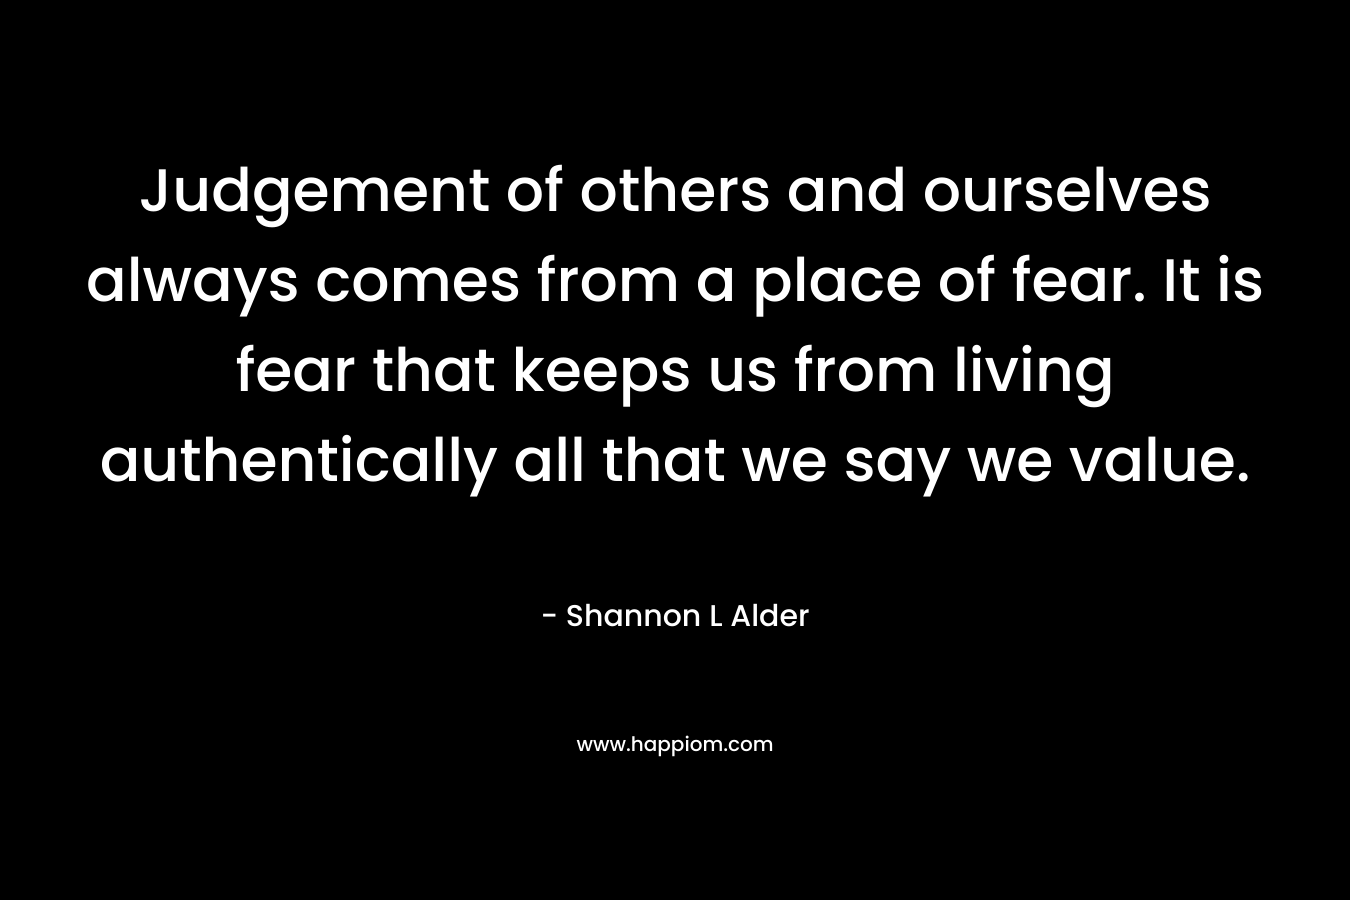 Judgement of others and ourselves always comes from a place of fear. It is fear that keeps us from living authentically all that we say we value.